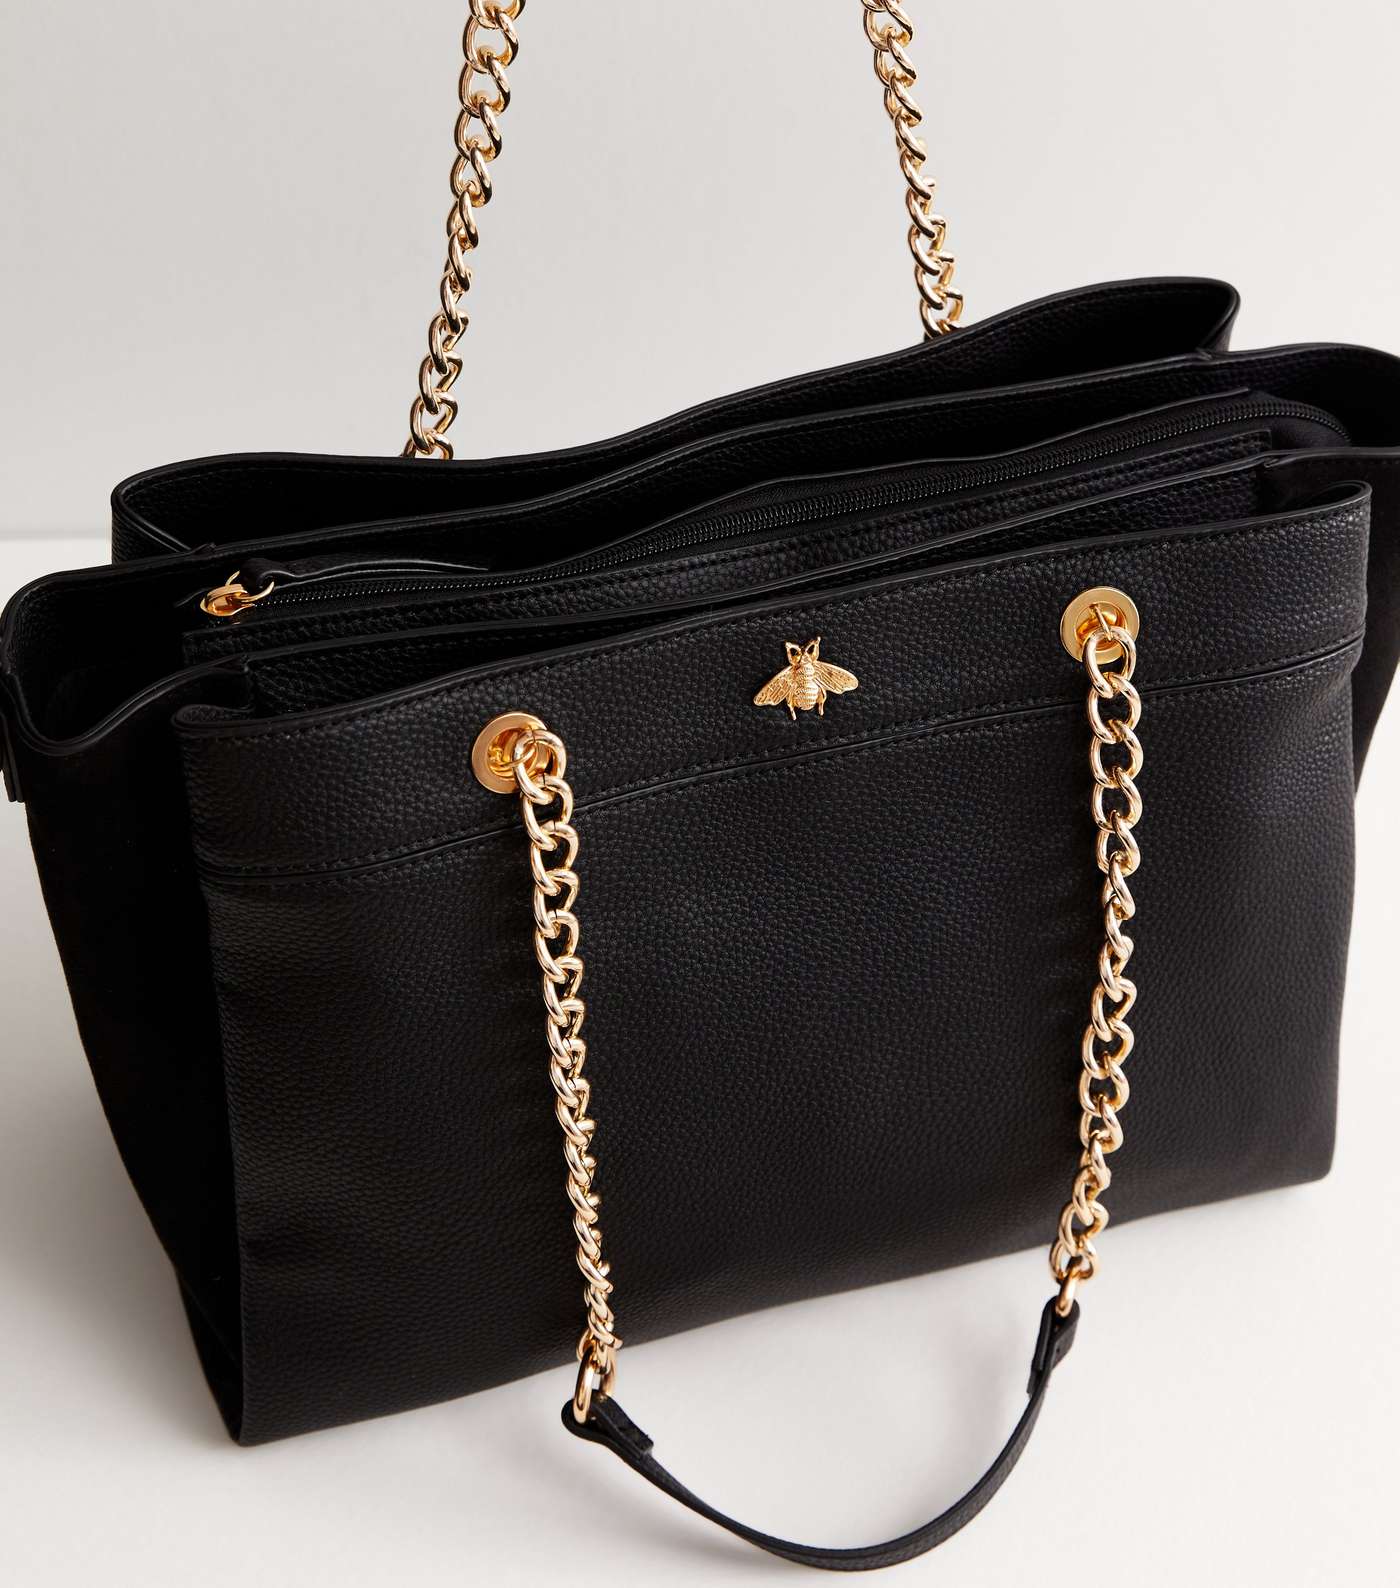 Black Leather-Look Bee Embellishment Tote Bag | New Look